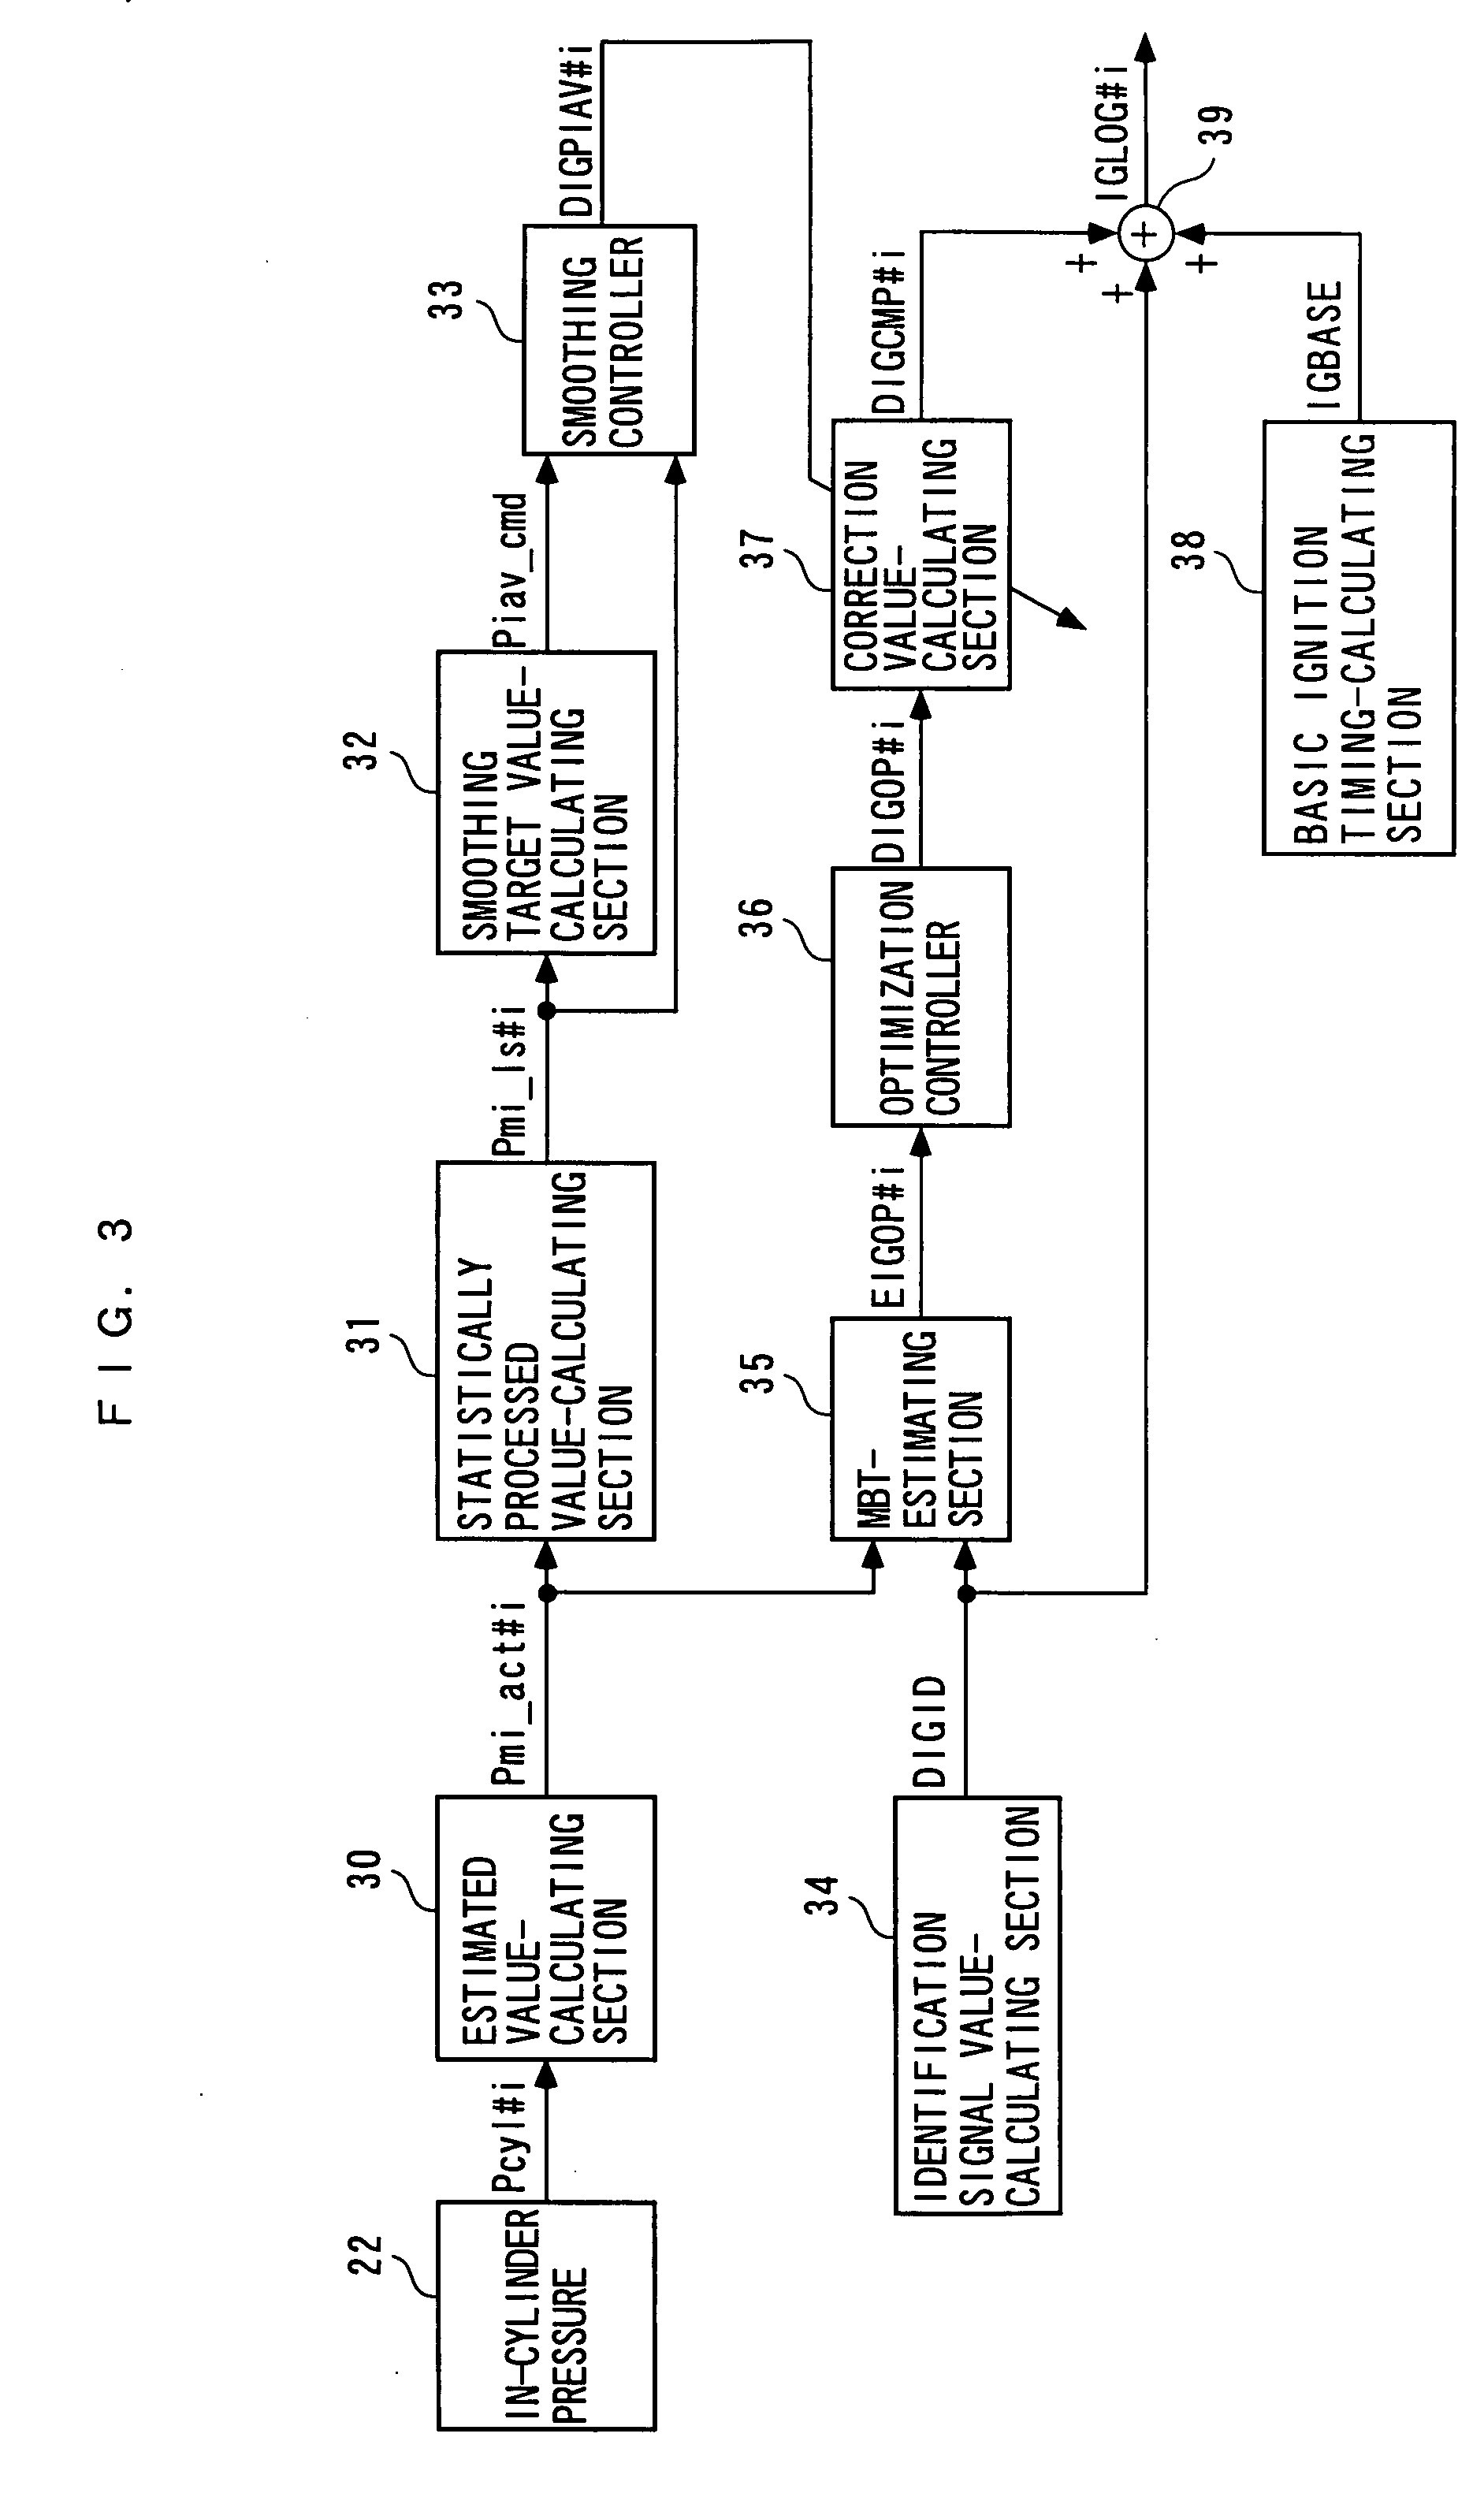 Ignition timing control system for internal combustion engine